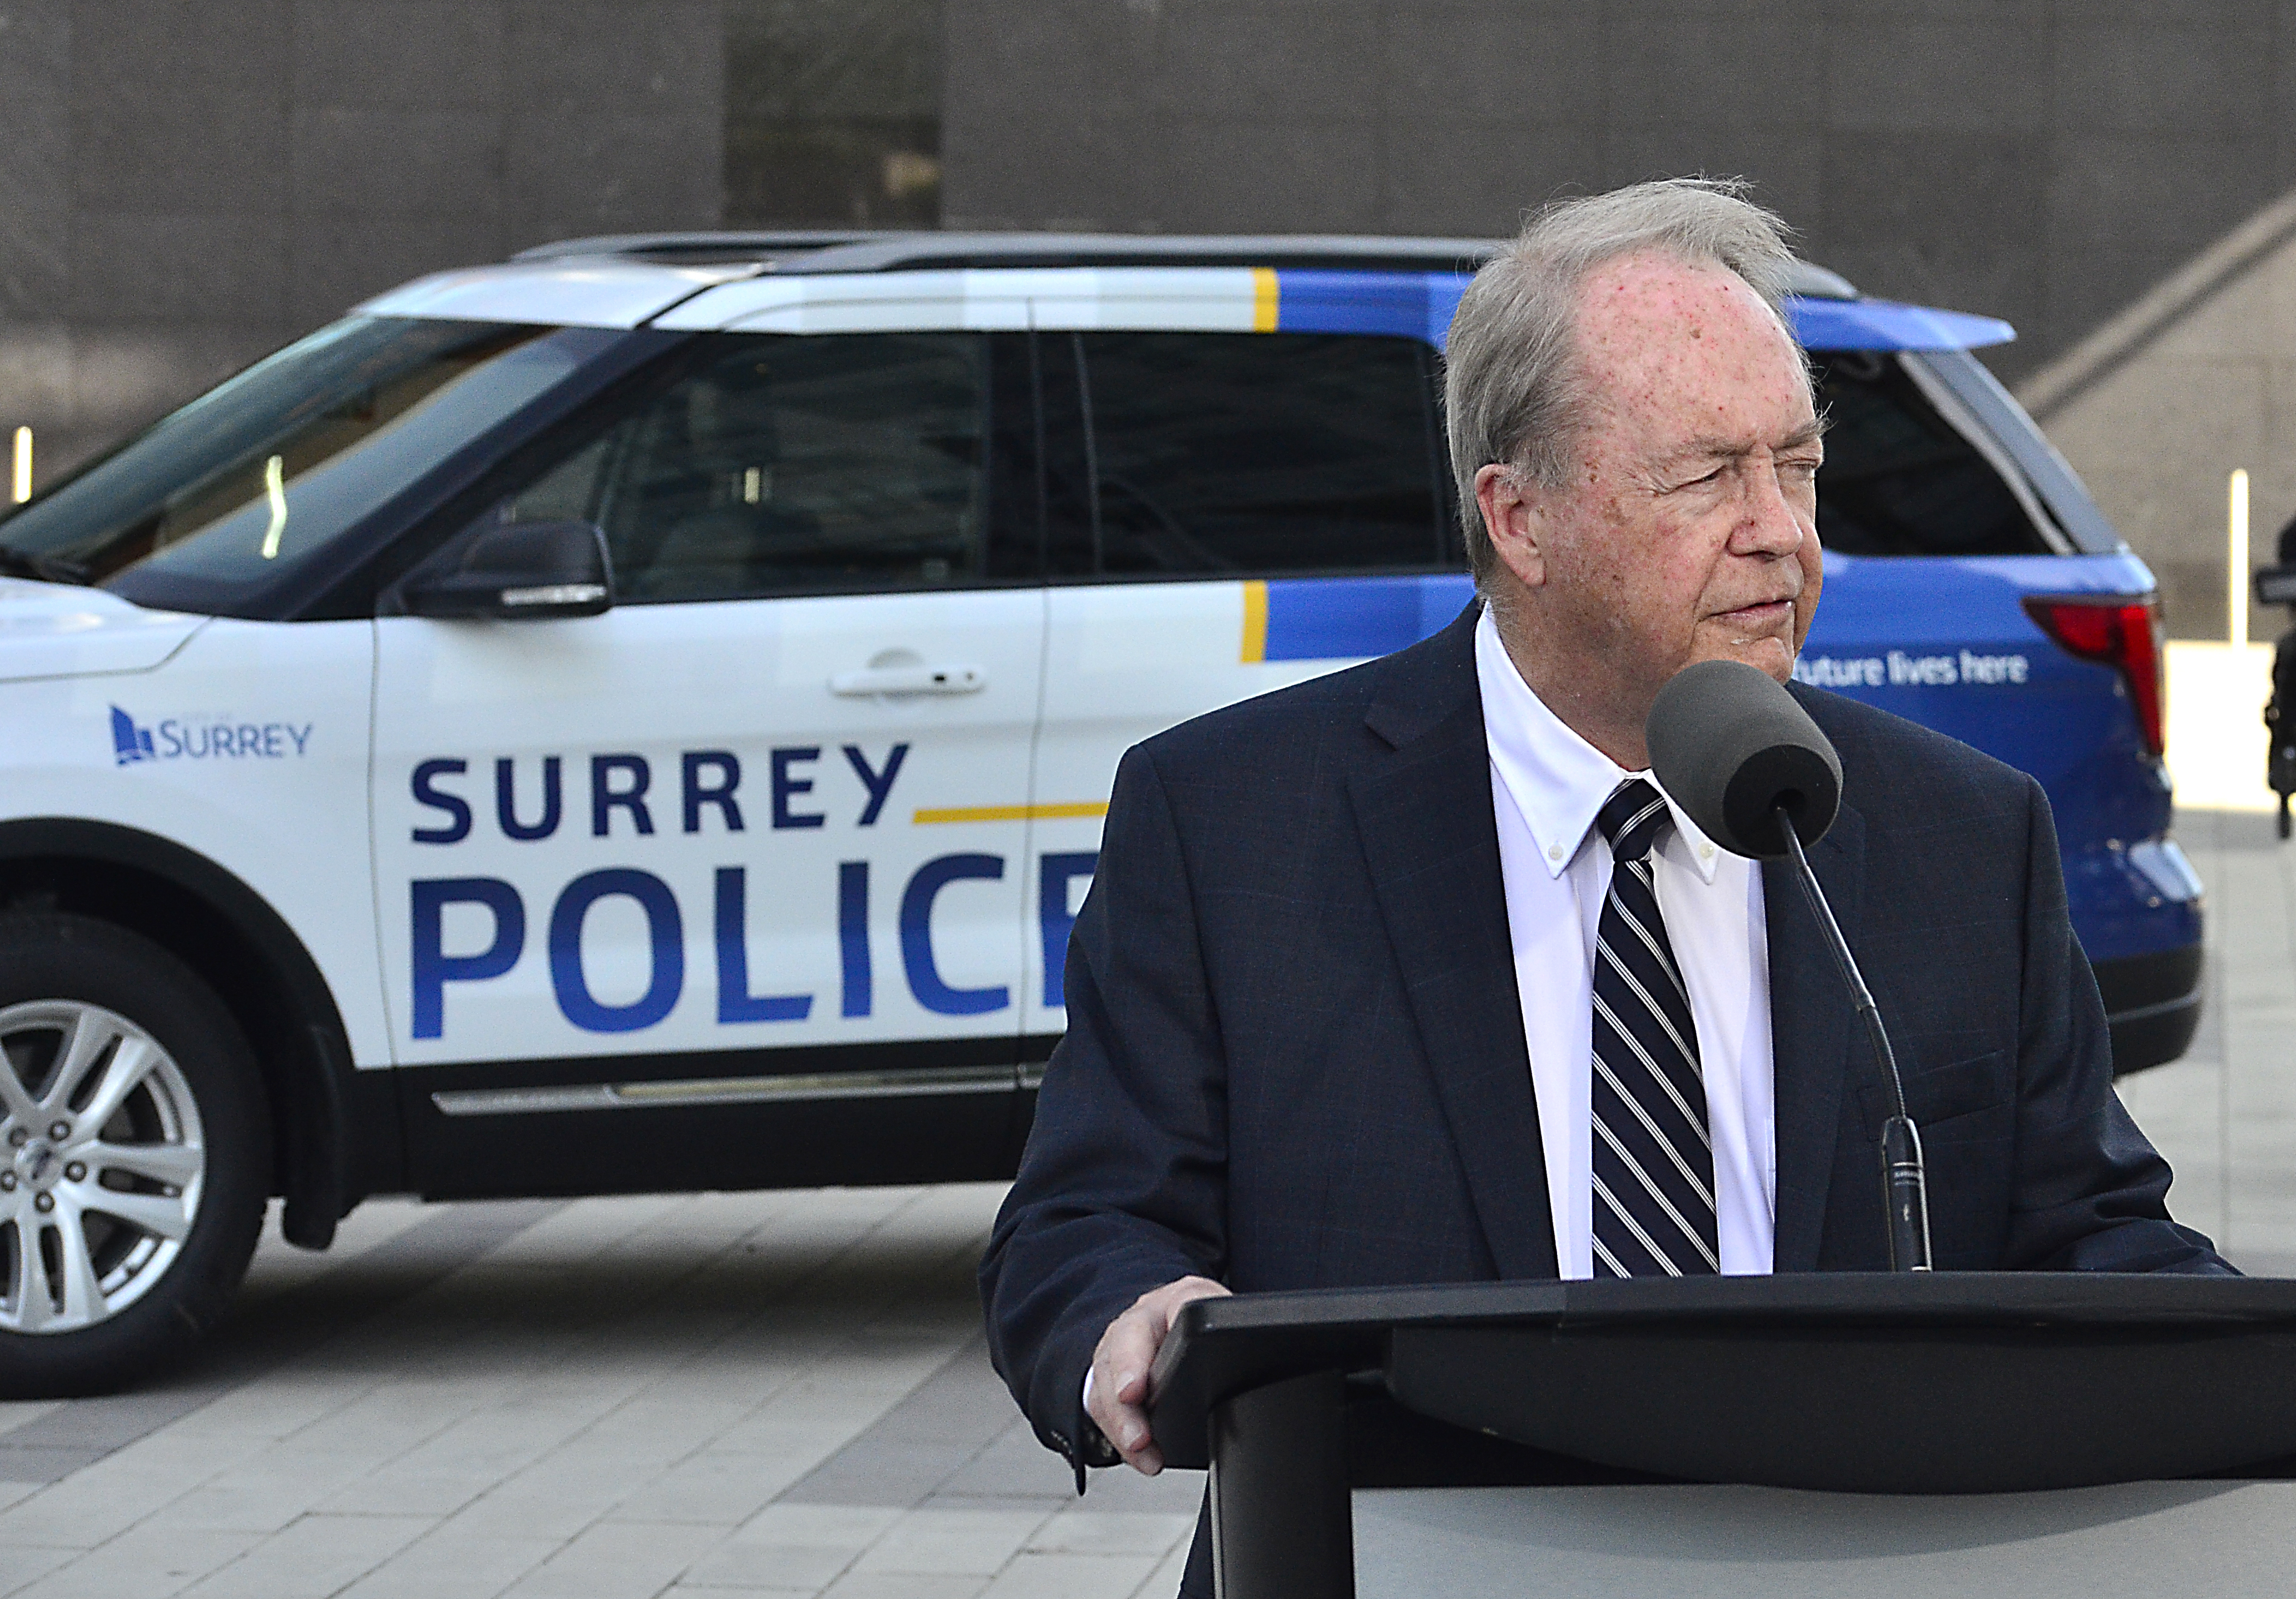 Group asks minister to audit policing in Surrey